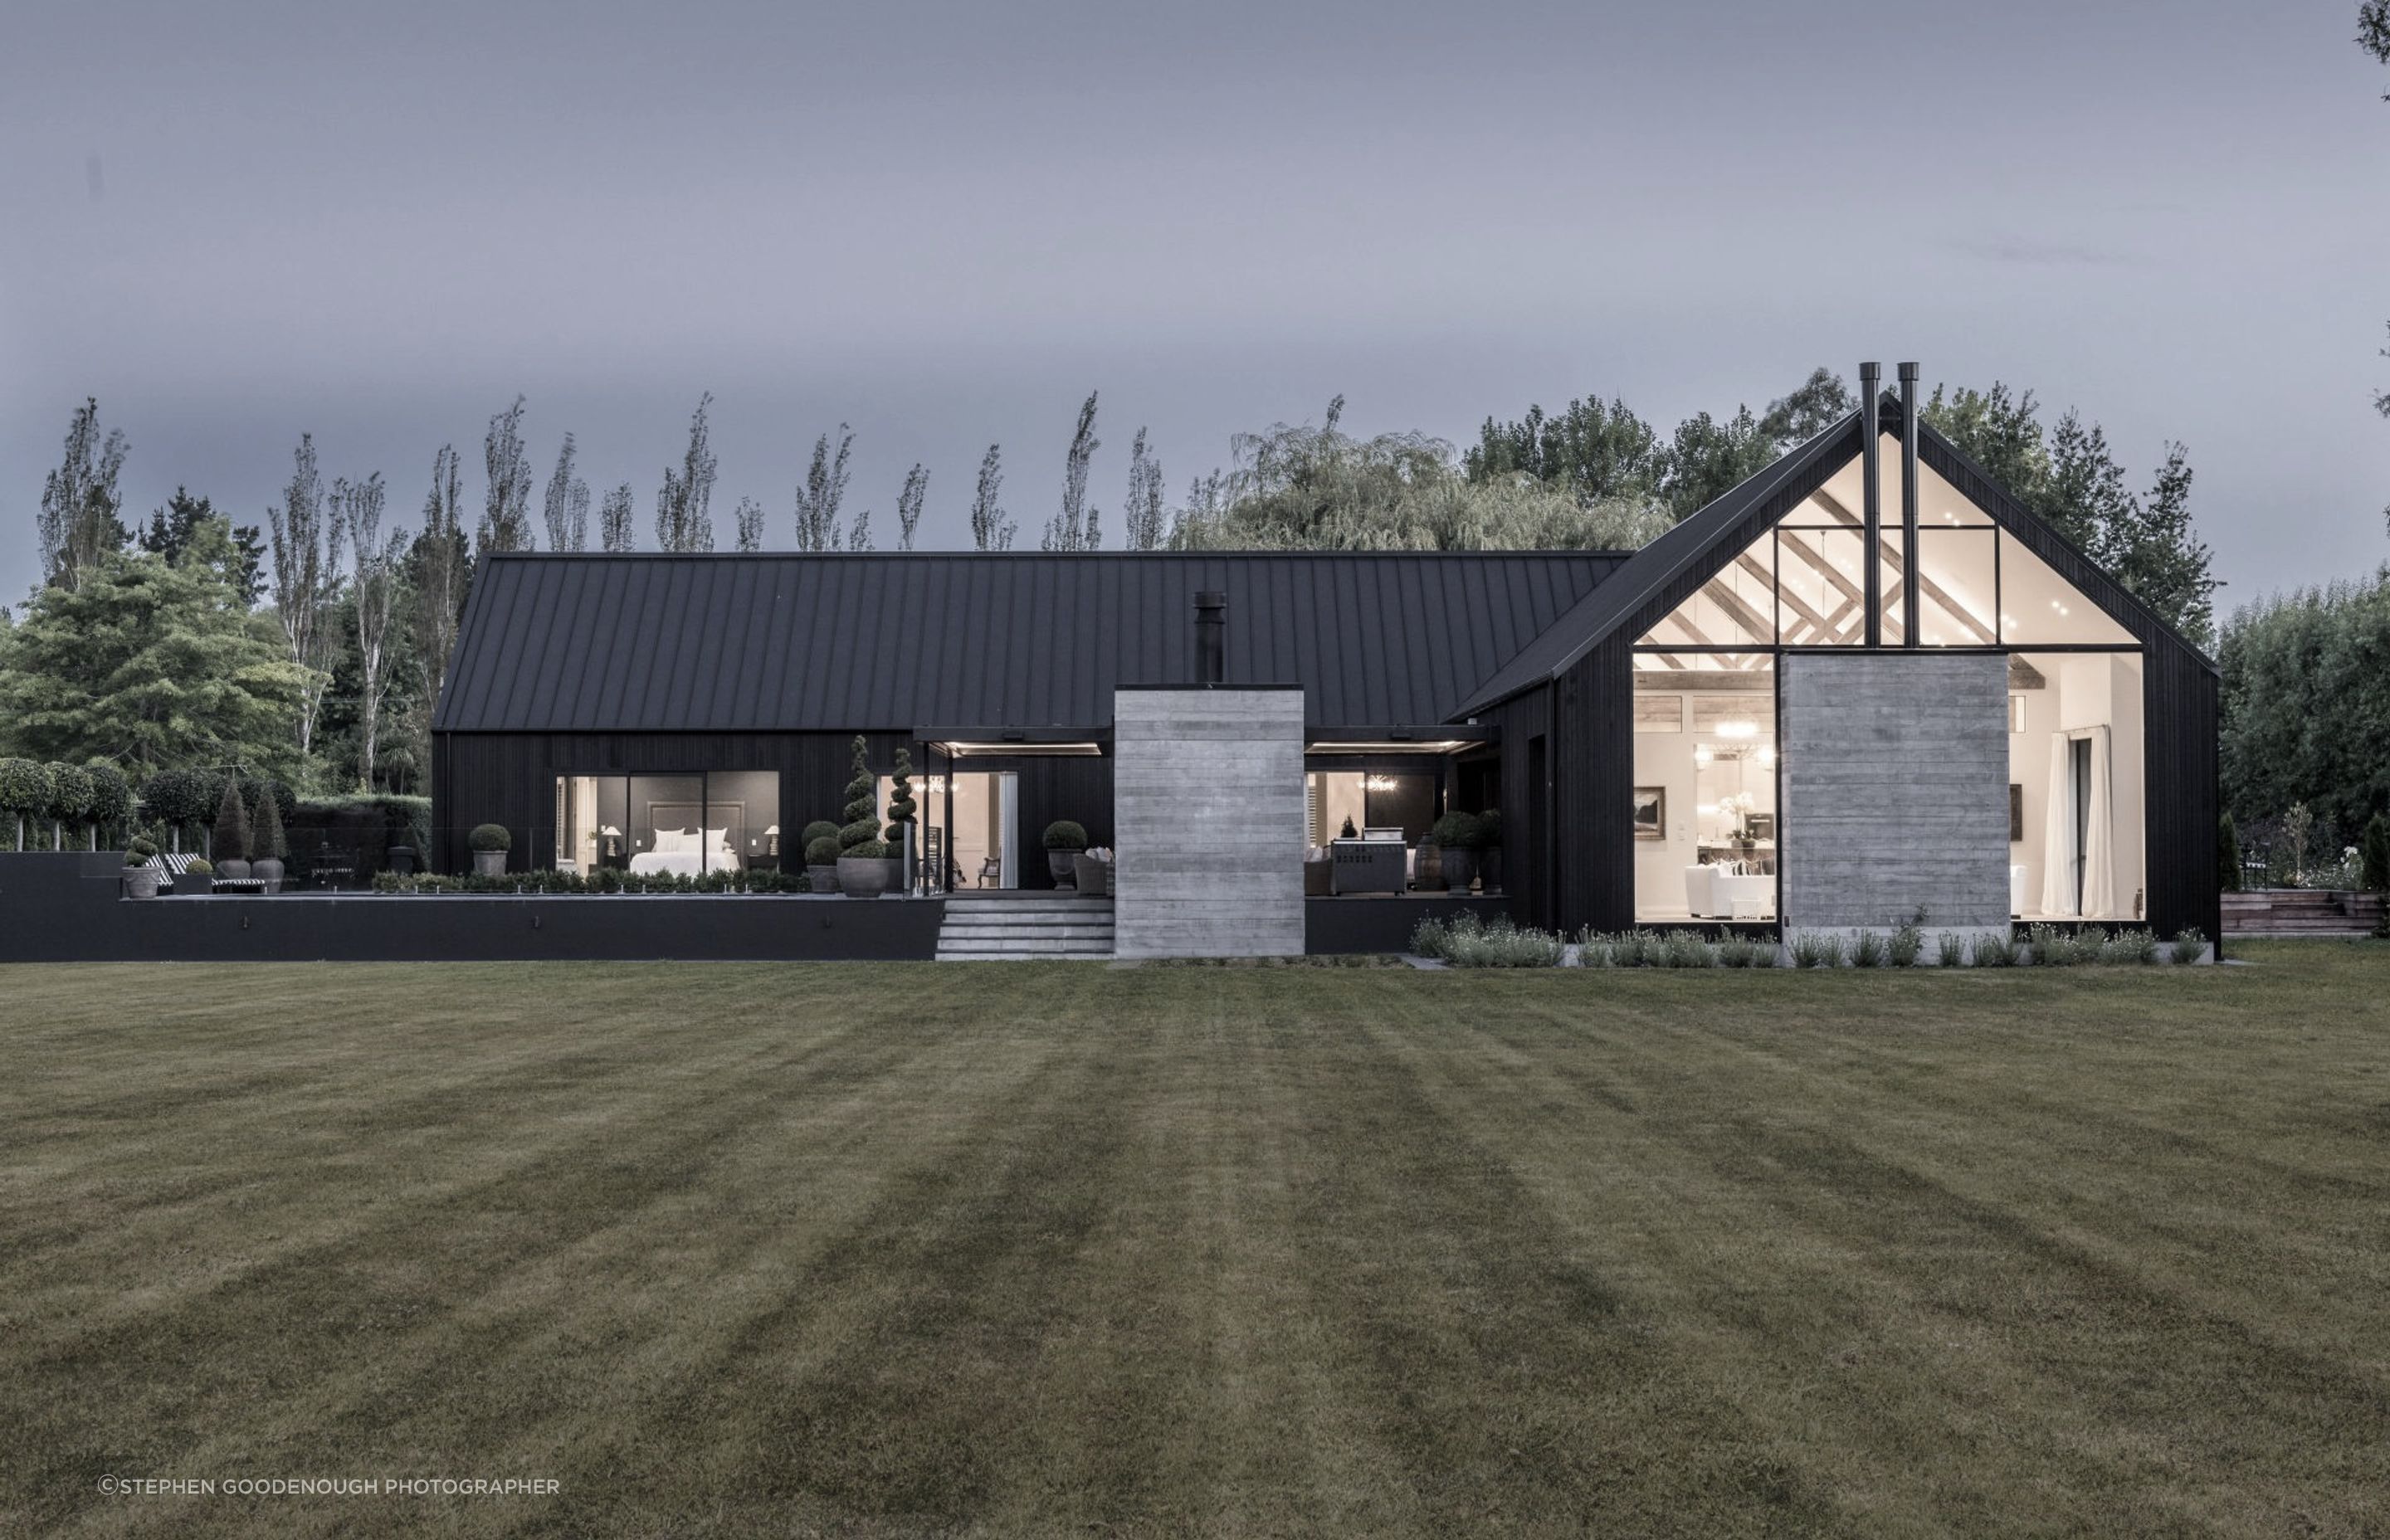 At night-time, the front elevation really showcases the monochromatic nature of this contemporary rural home.